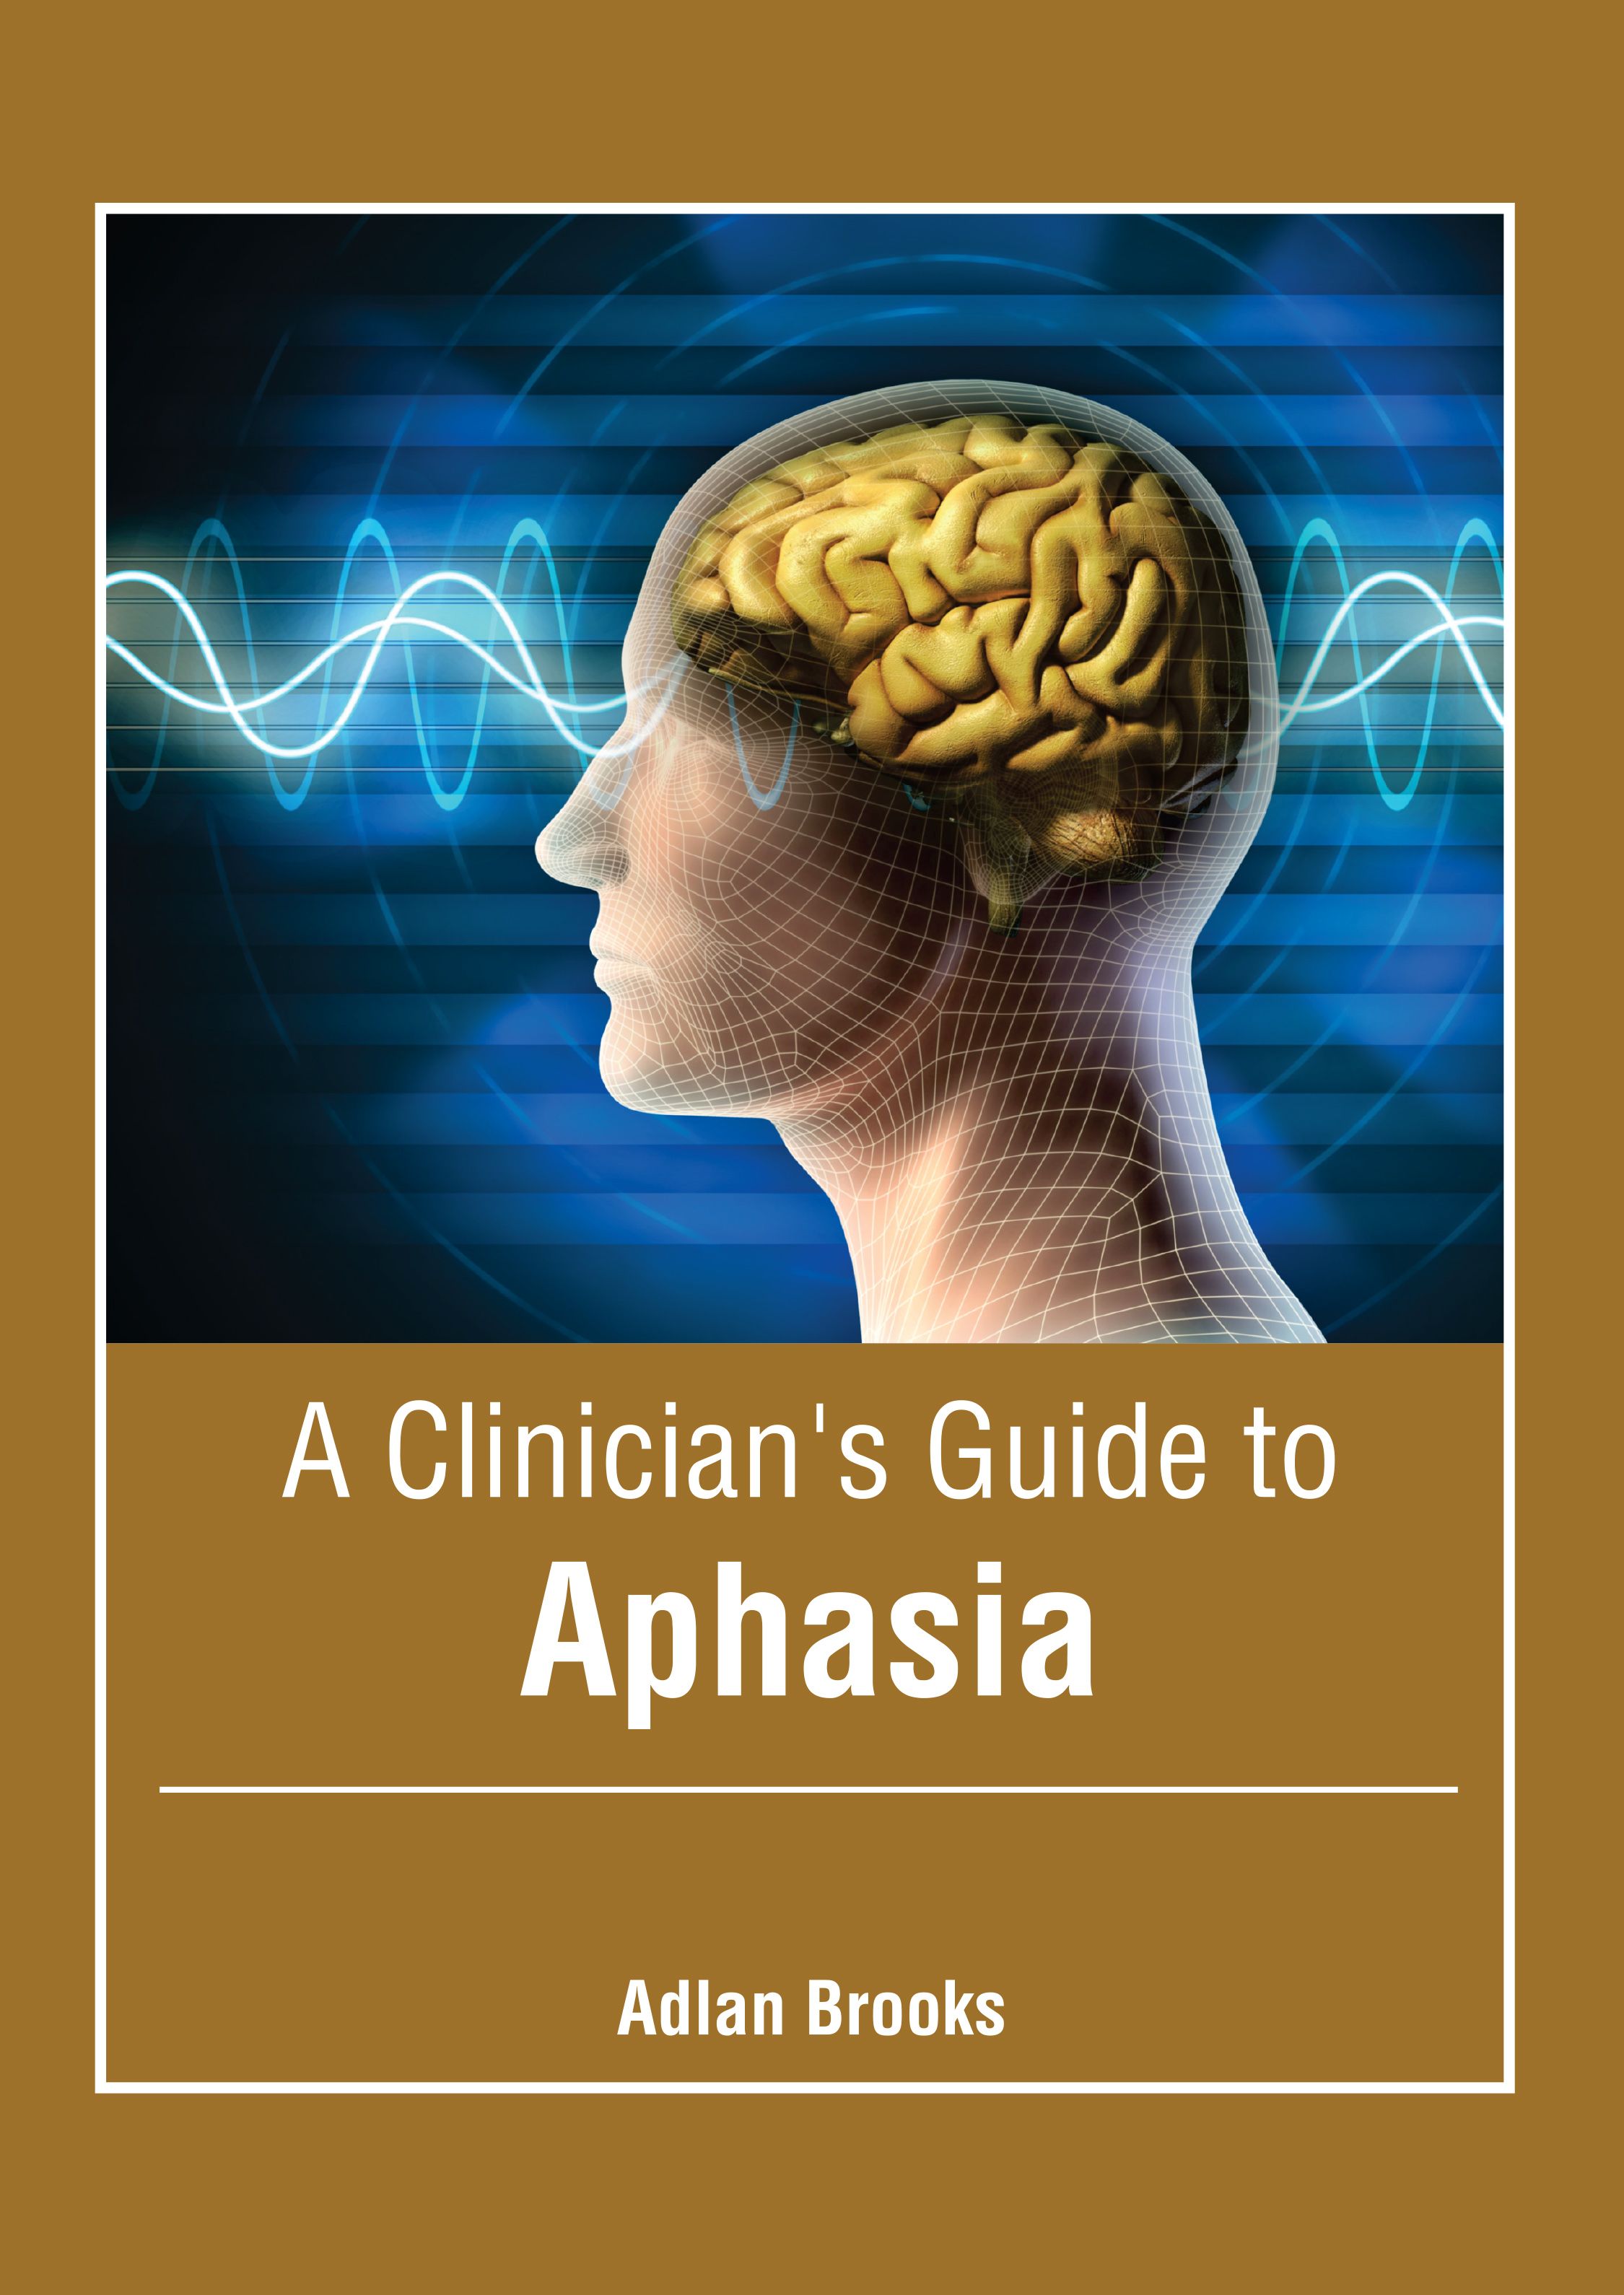 A CLINICIAN'S GUIDE TO APHASIA